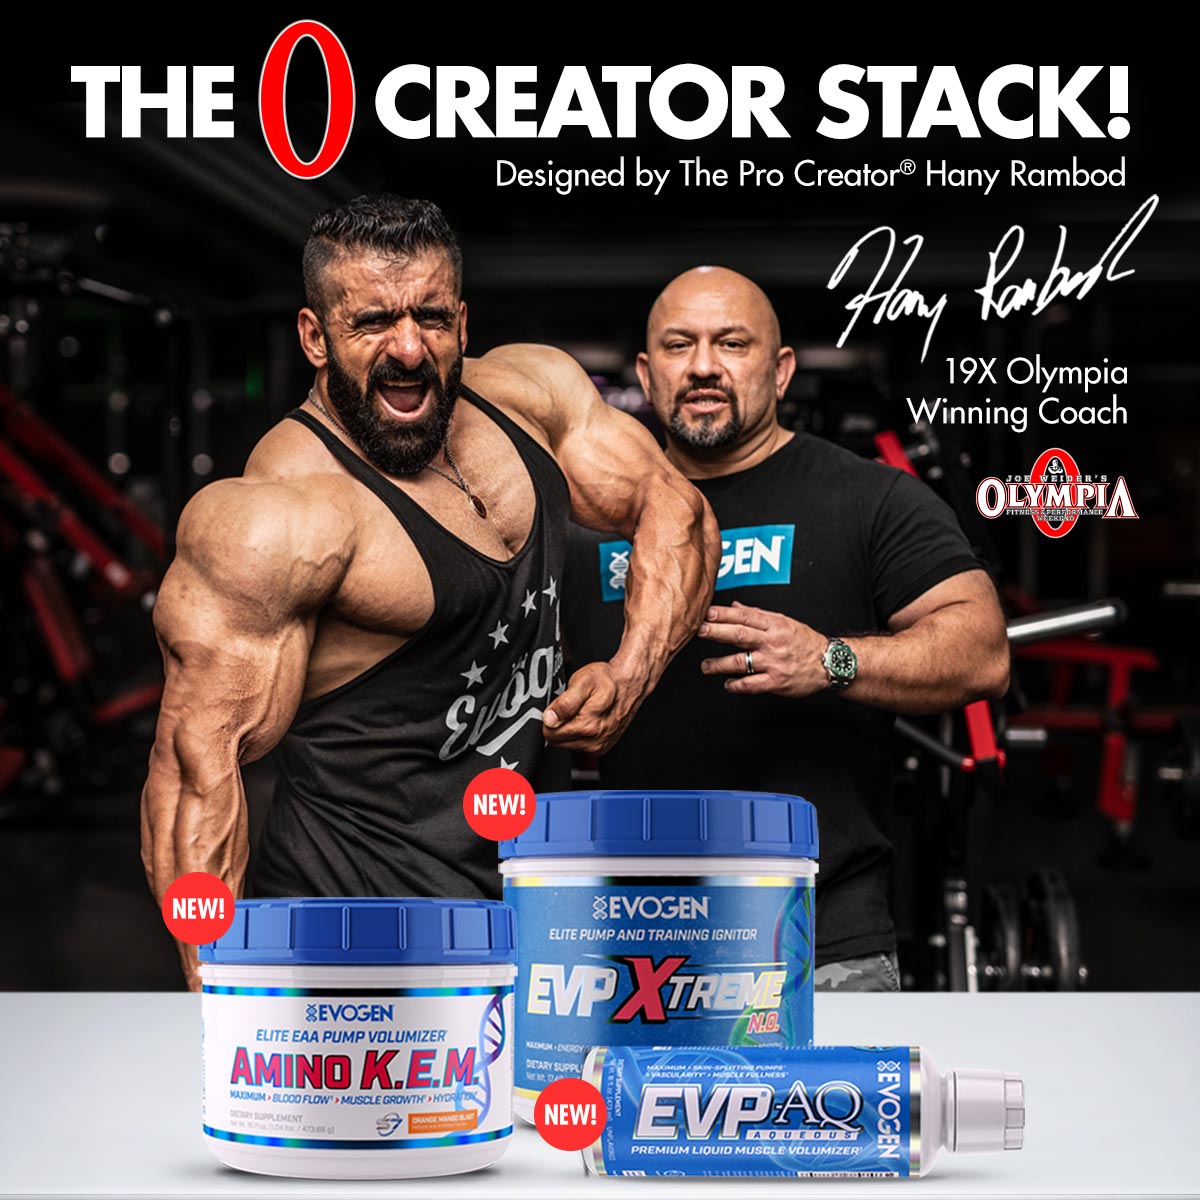 Evogen Announces The Launch of Three New Products at the 2019 Olympia Weekend